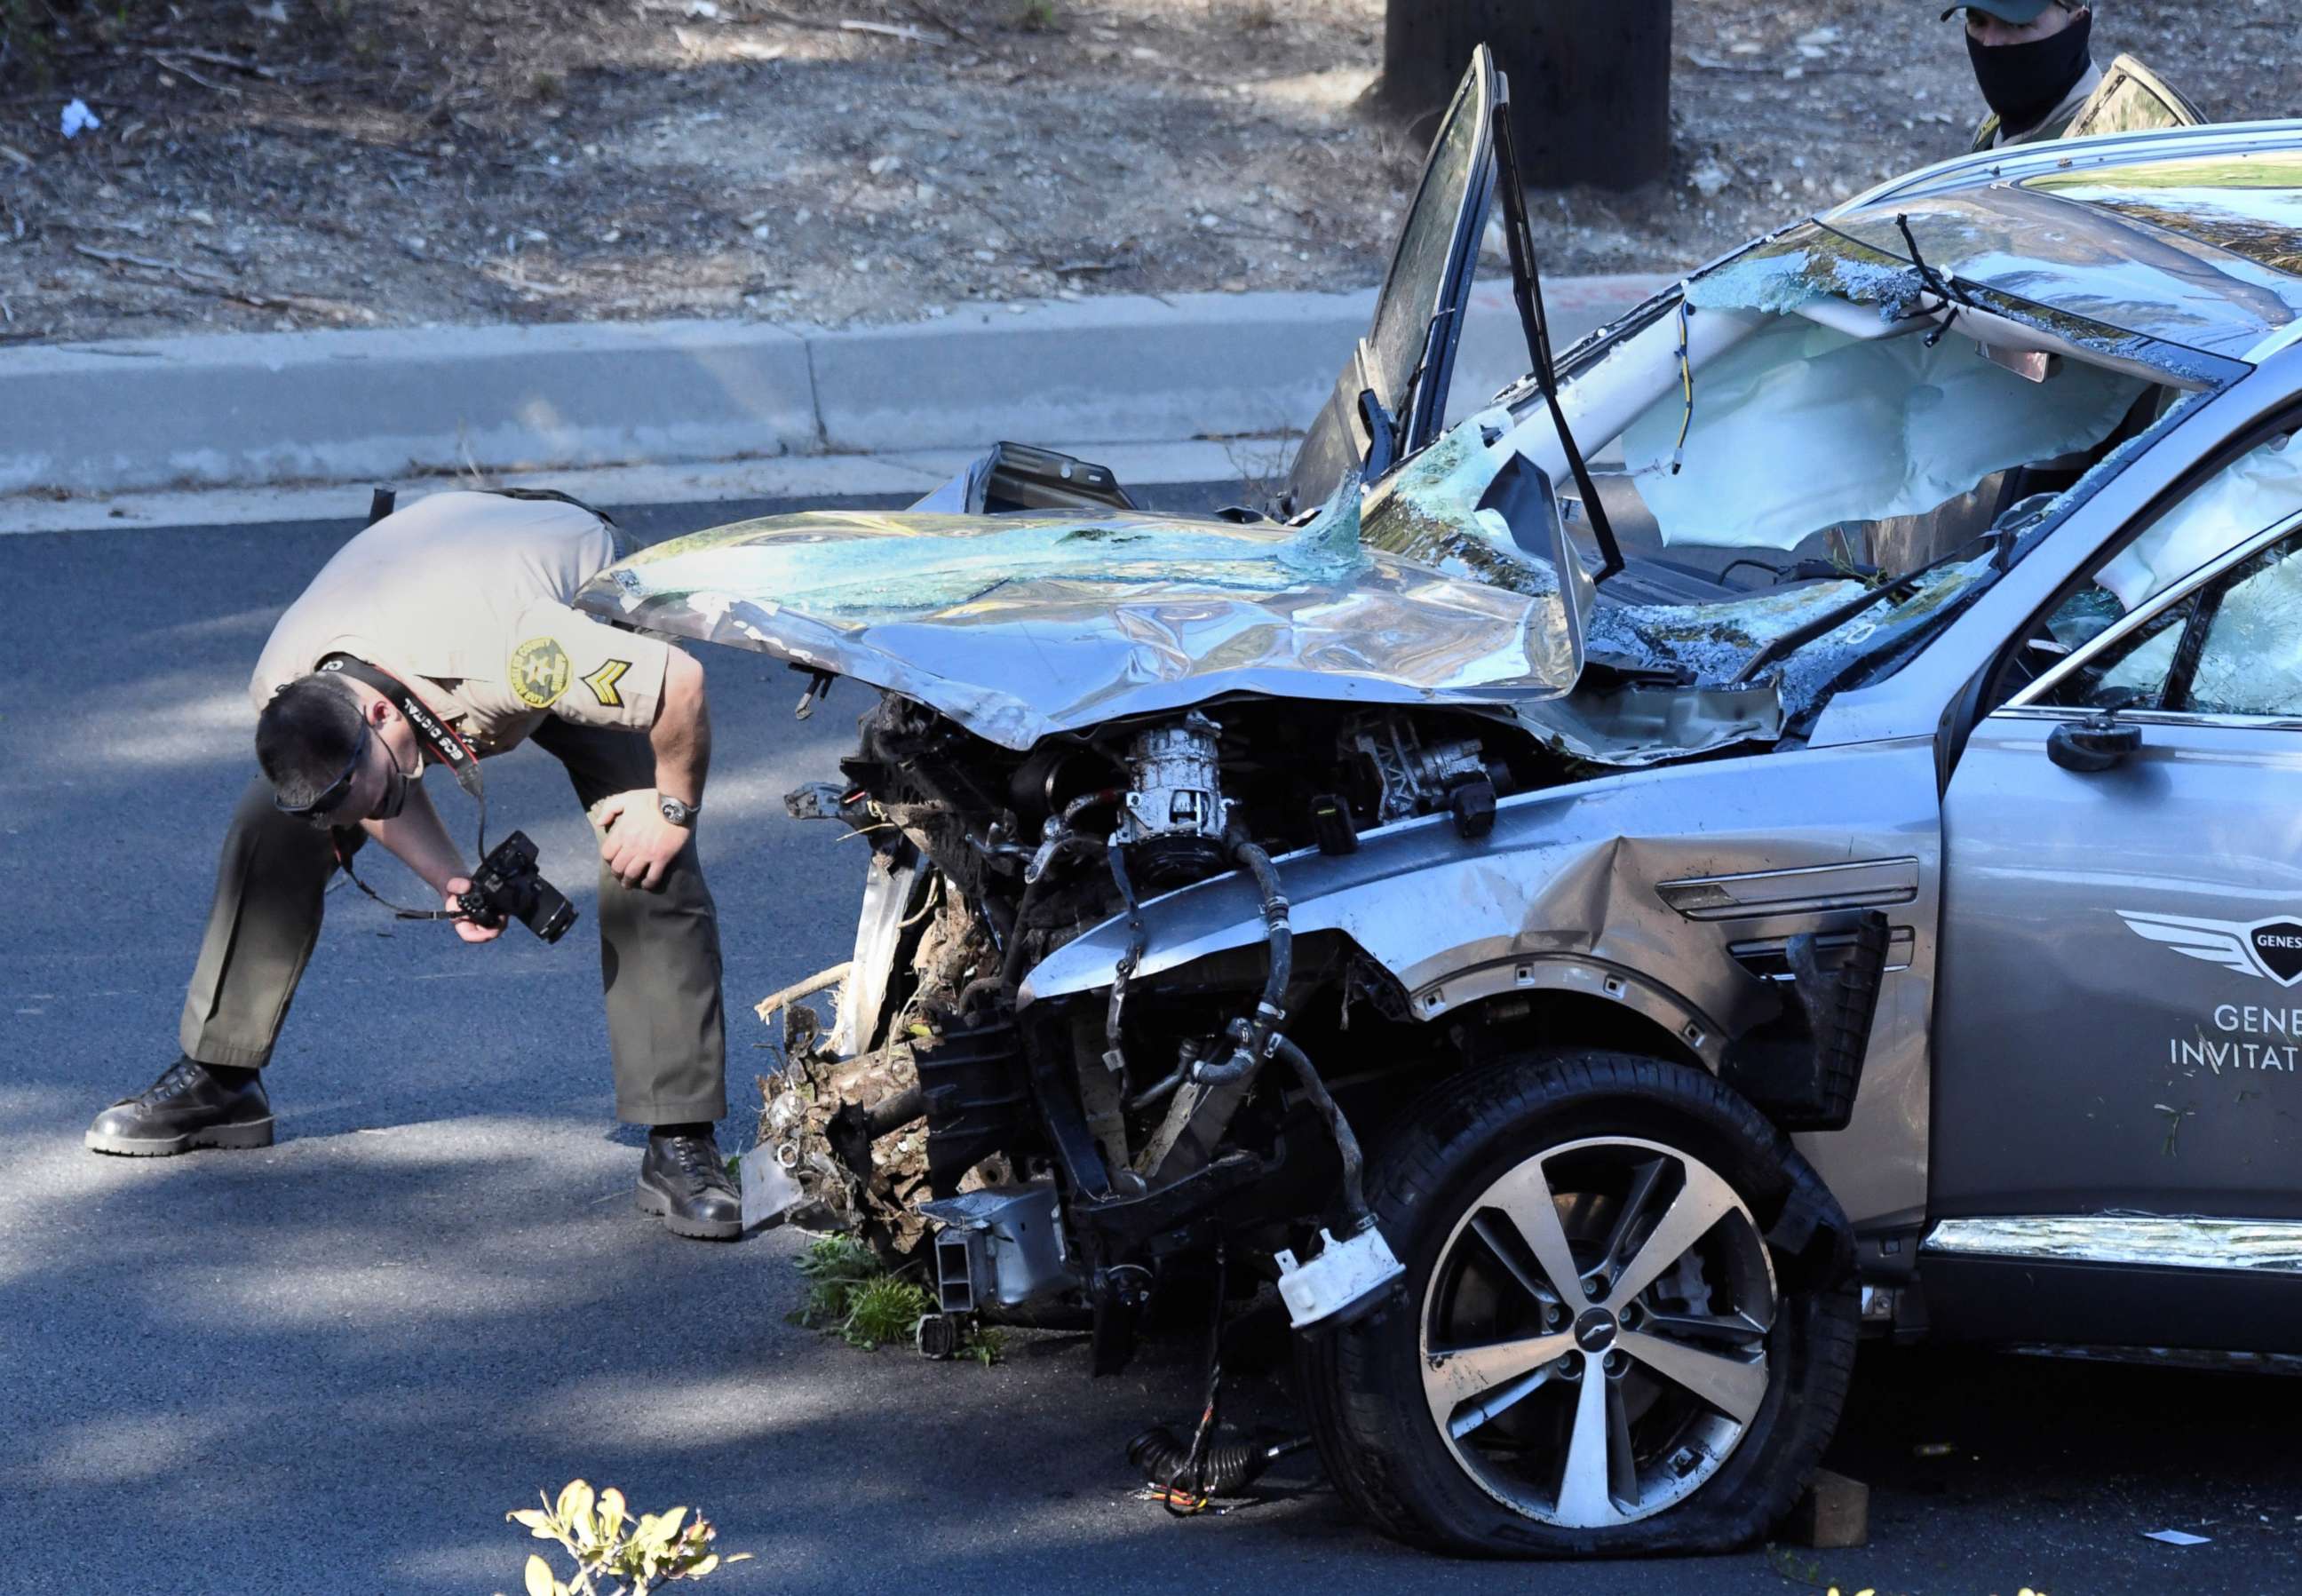 PHOTO: Los Angeles County Sheriff's Deputies inspect the vehicle of golfer Tiger Woods after it was involved in a single-vehicle accident in Los Angeles, Feb. 23, 2021.